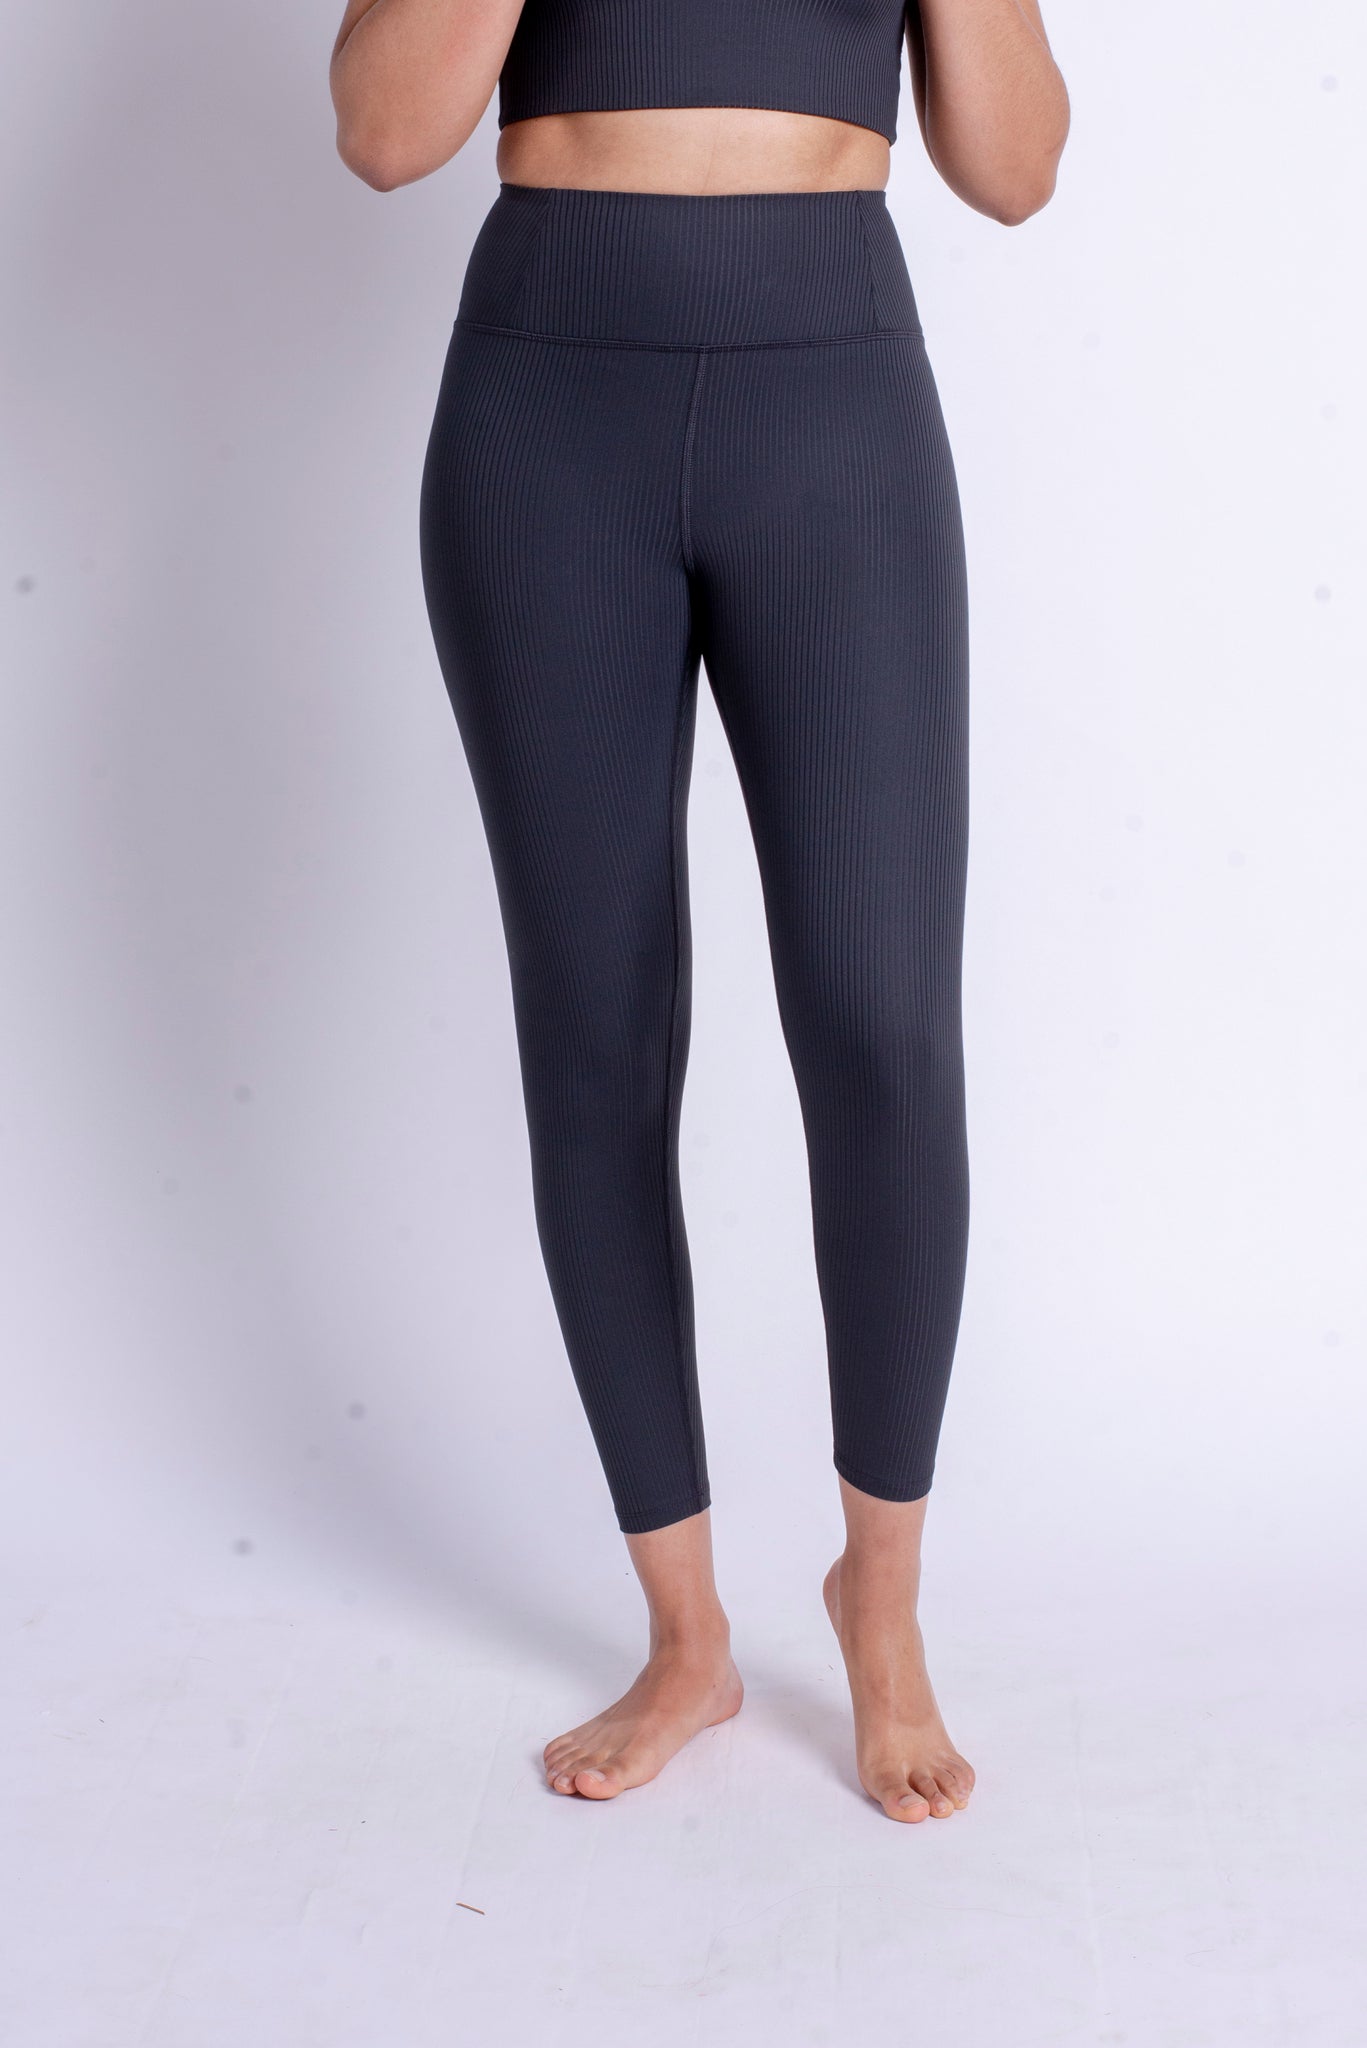 Women's Leggings Chill Chasers Collection (Cotton Rib